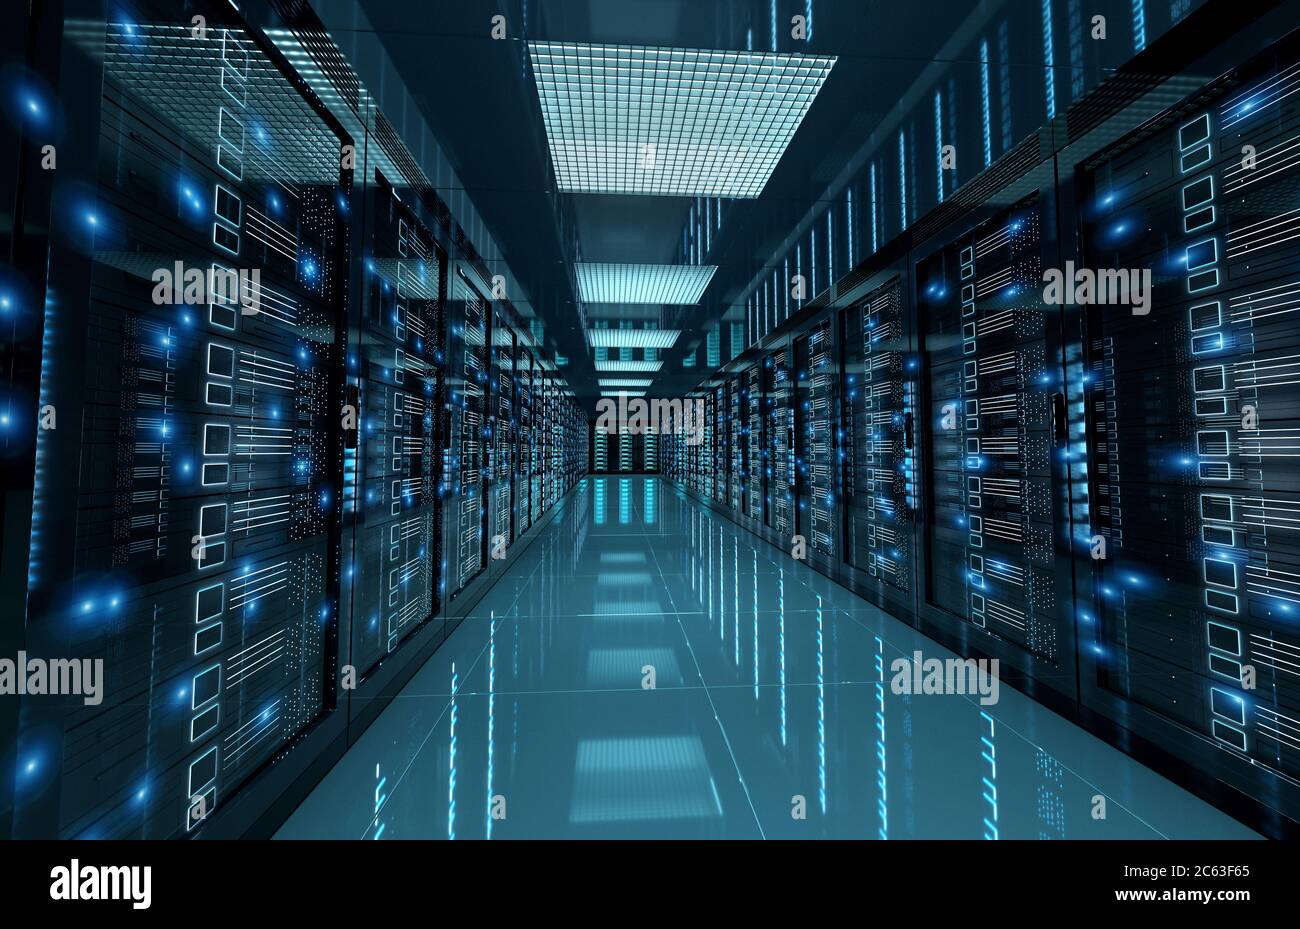 Dark servers data center room with computers and storage systems 3D rendering Stock Photo